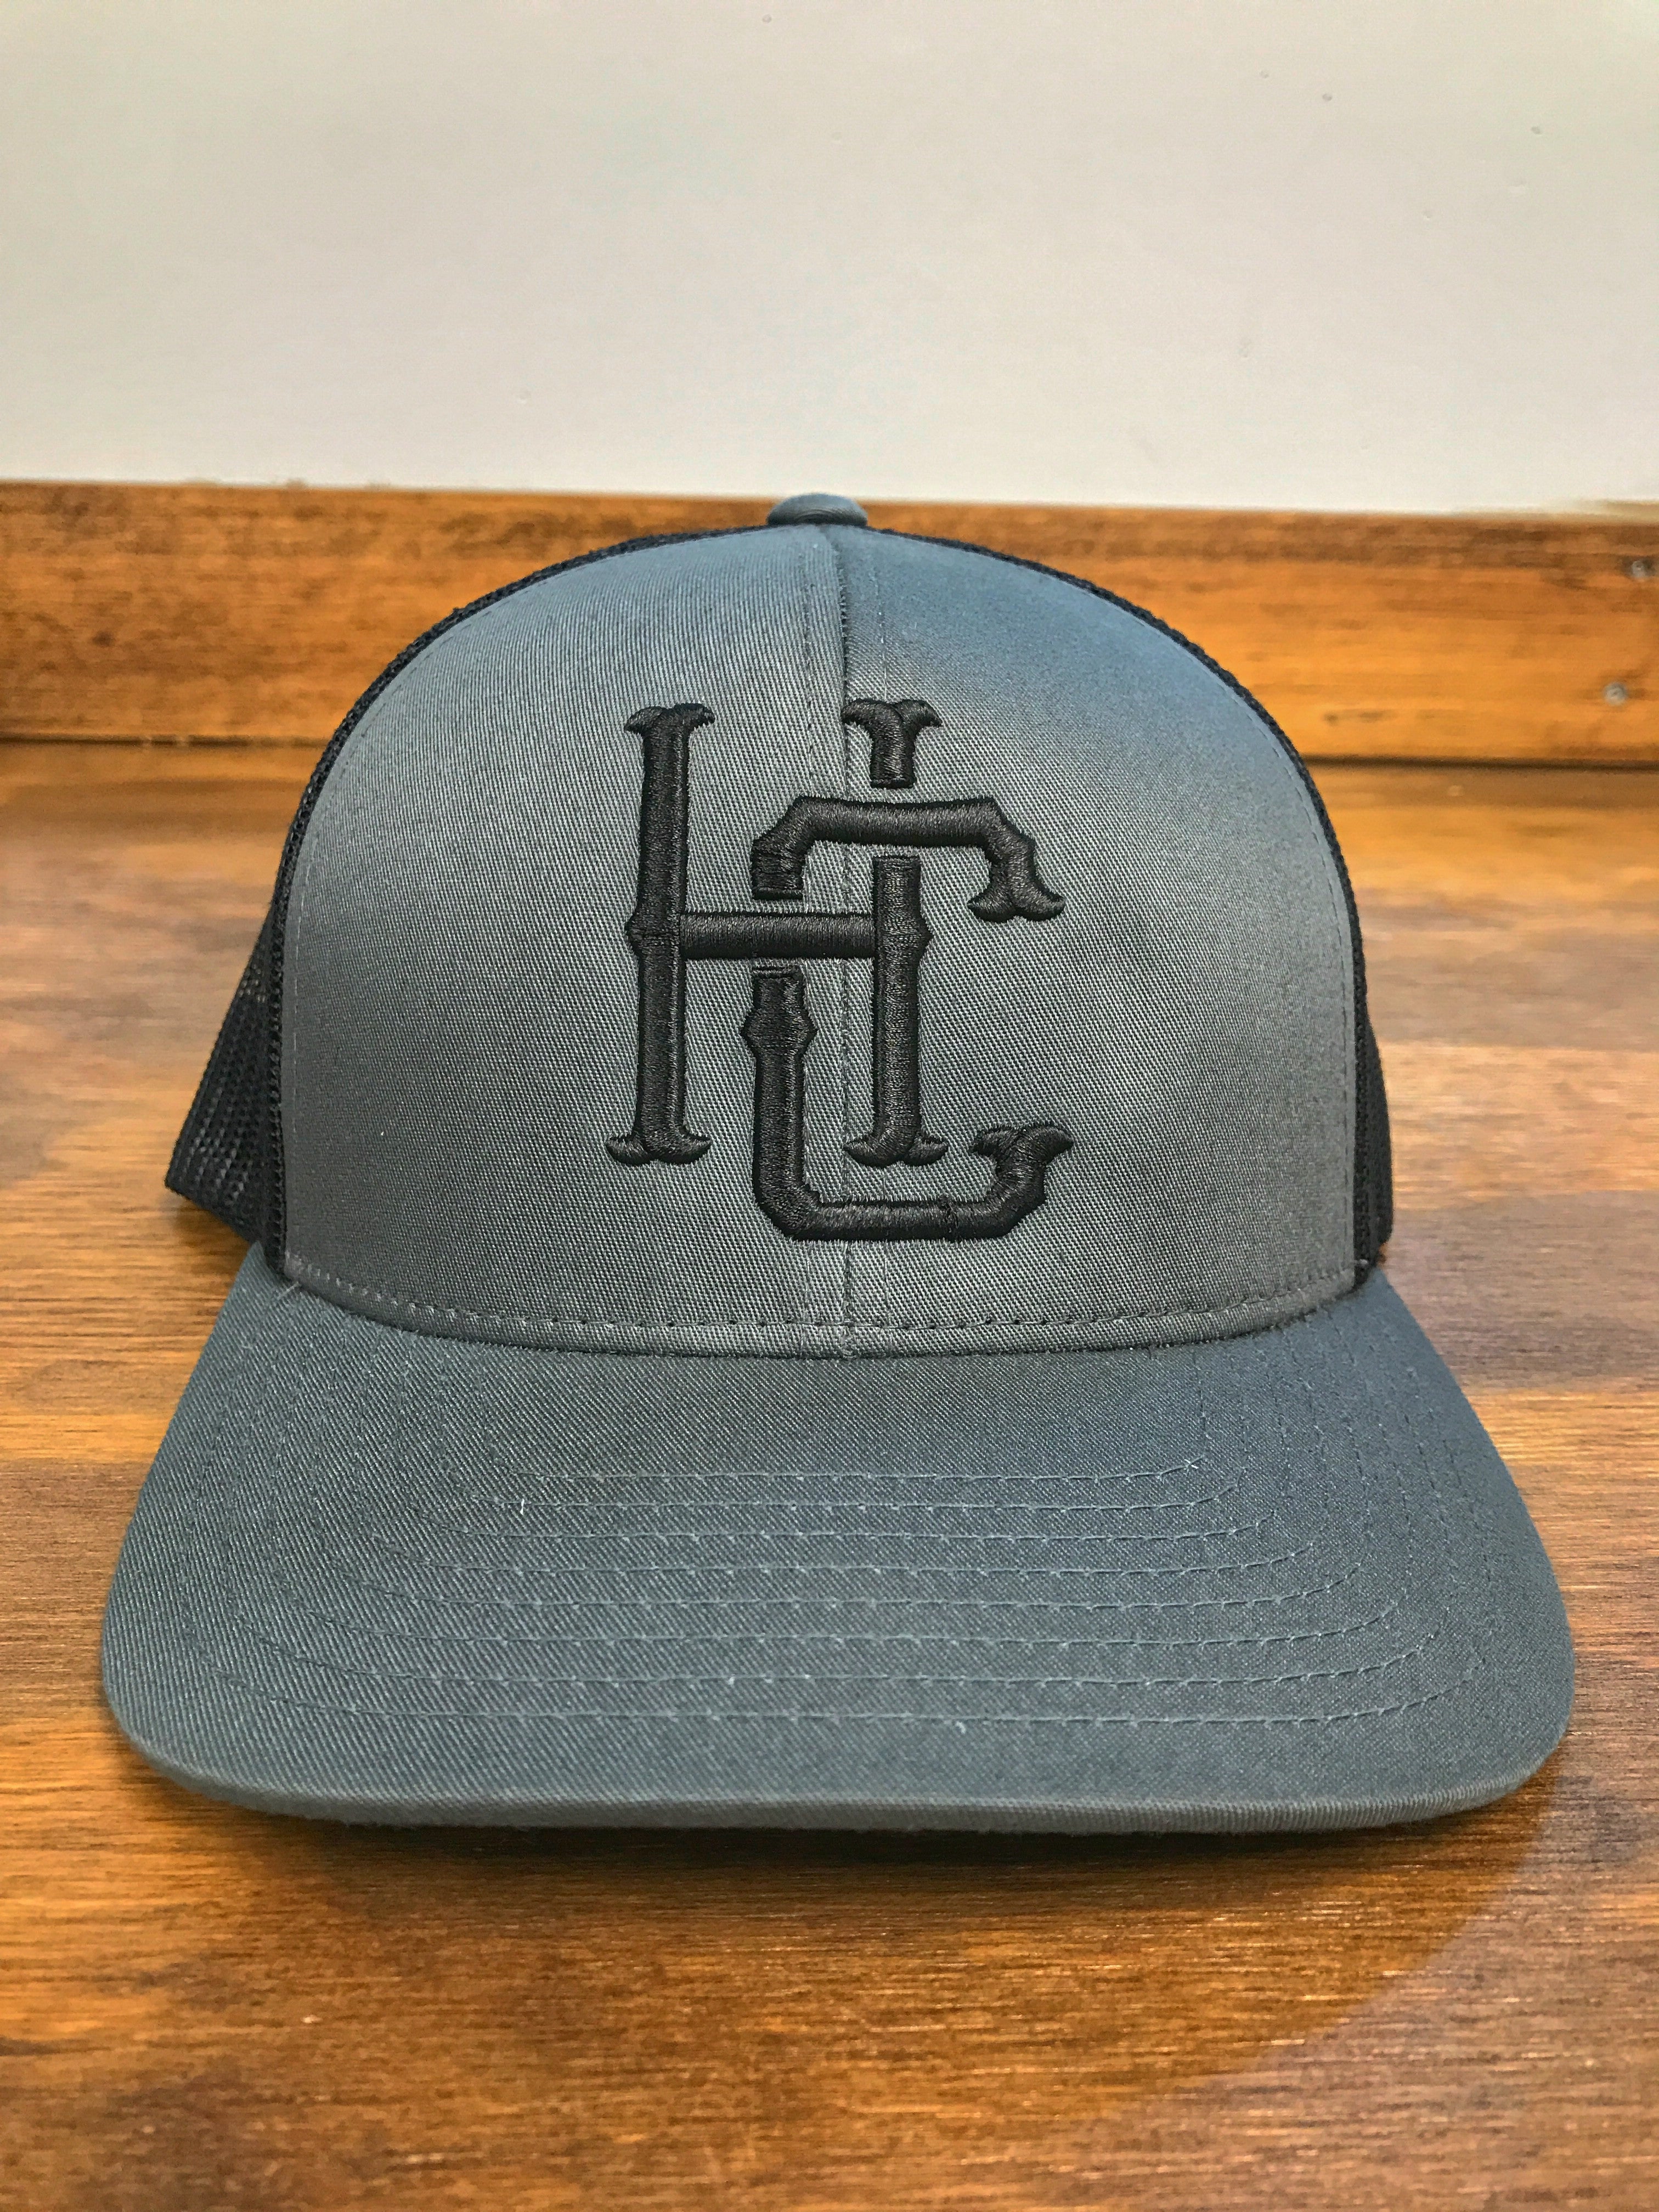 Hard Chargers FC Letter Snapback